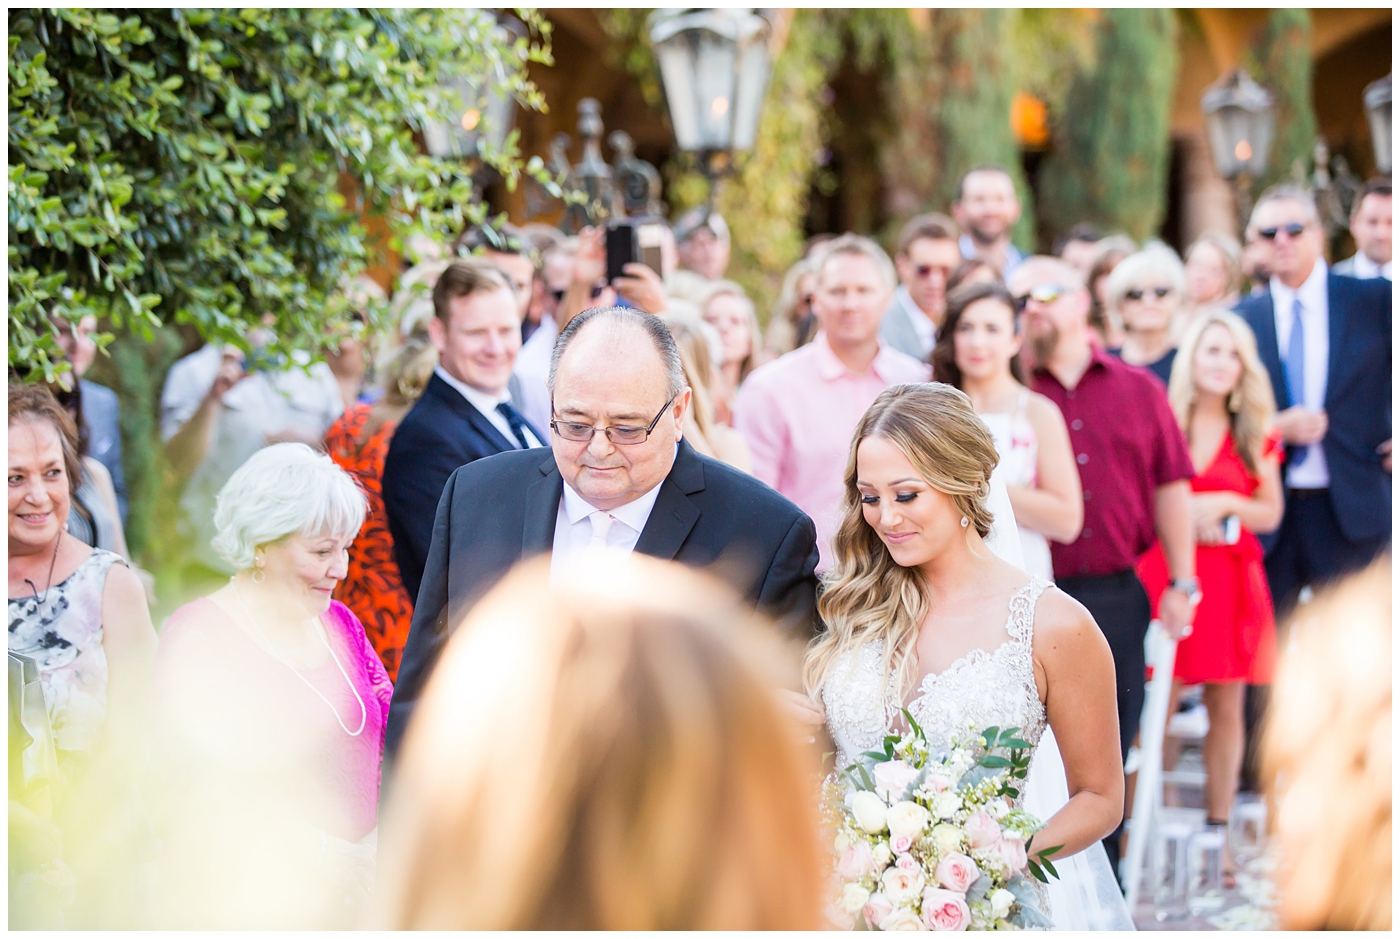 bride in lillian lottie couture strapped beaded wedding dress with organic blush, white and greenery bouquet walking down the aisle with father at outdoor wedding ceremony